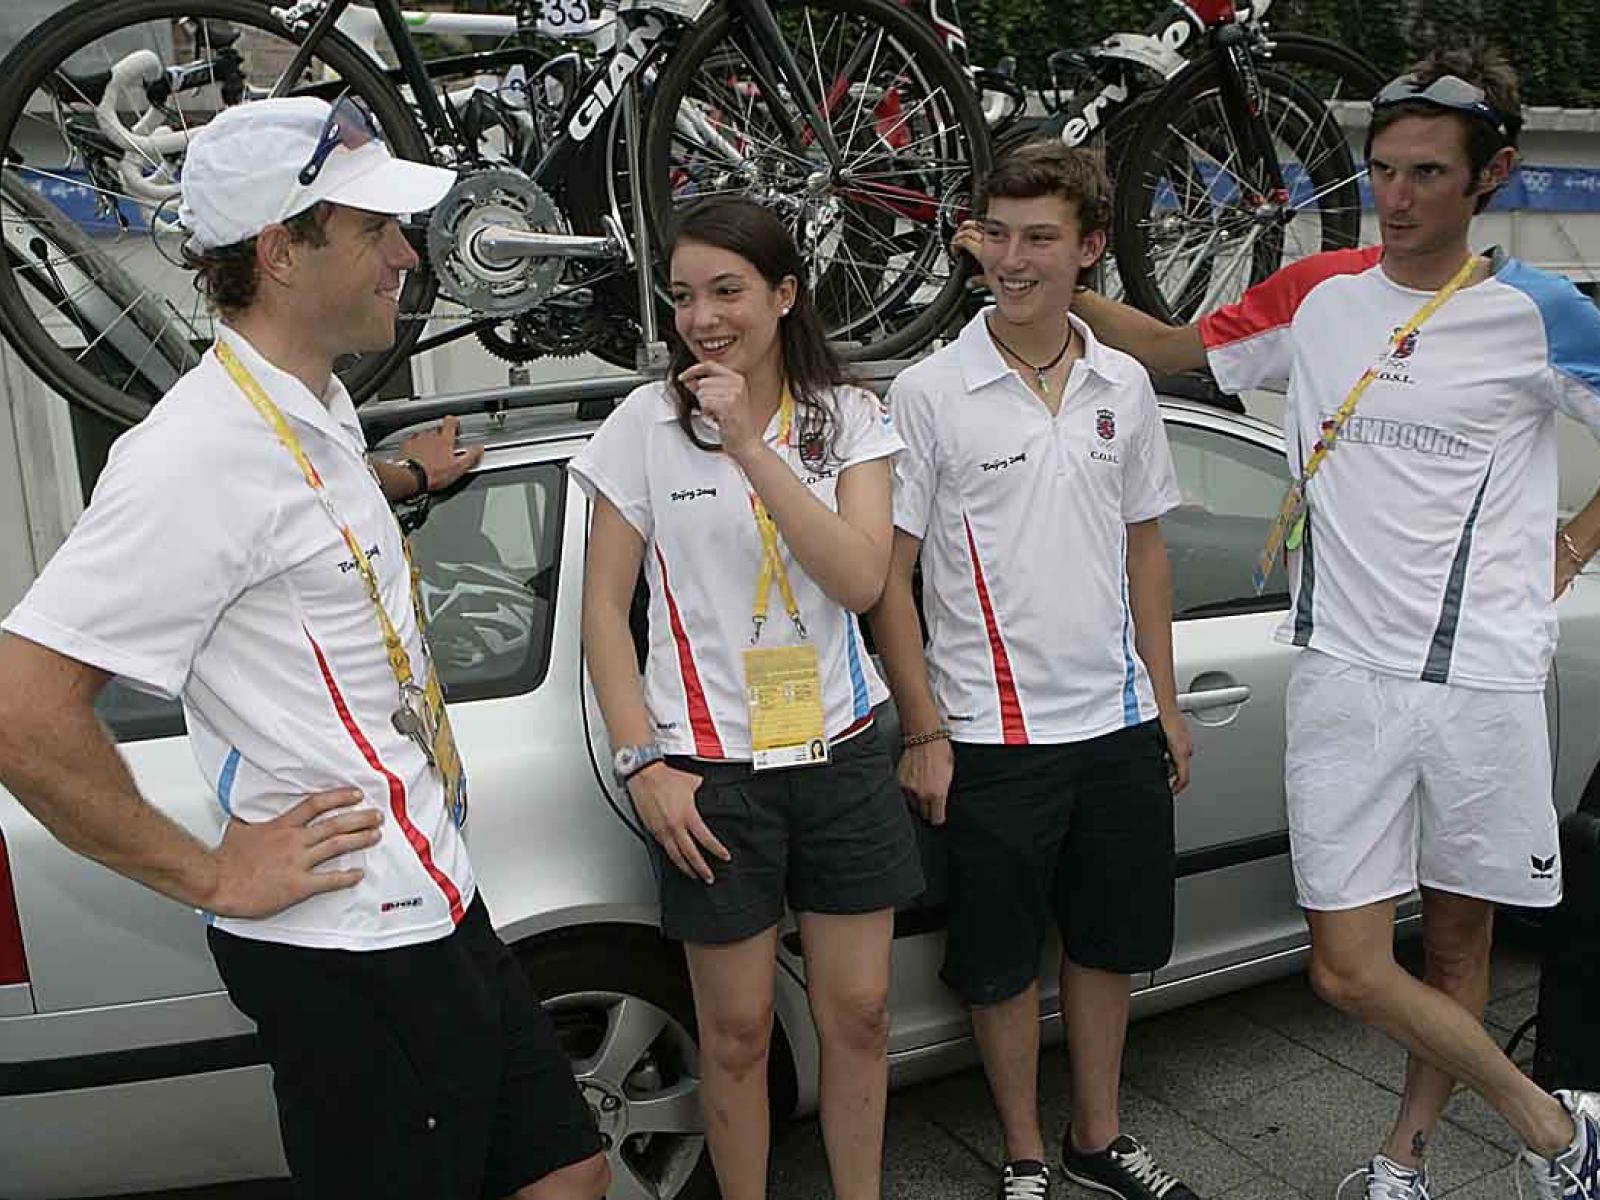 Princess Alexandra and Prince Sébastien at the Olympic Games in Beijing in 2008